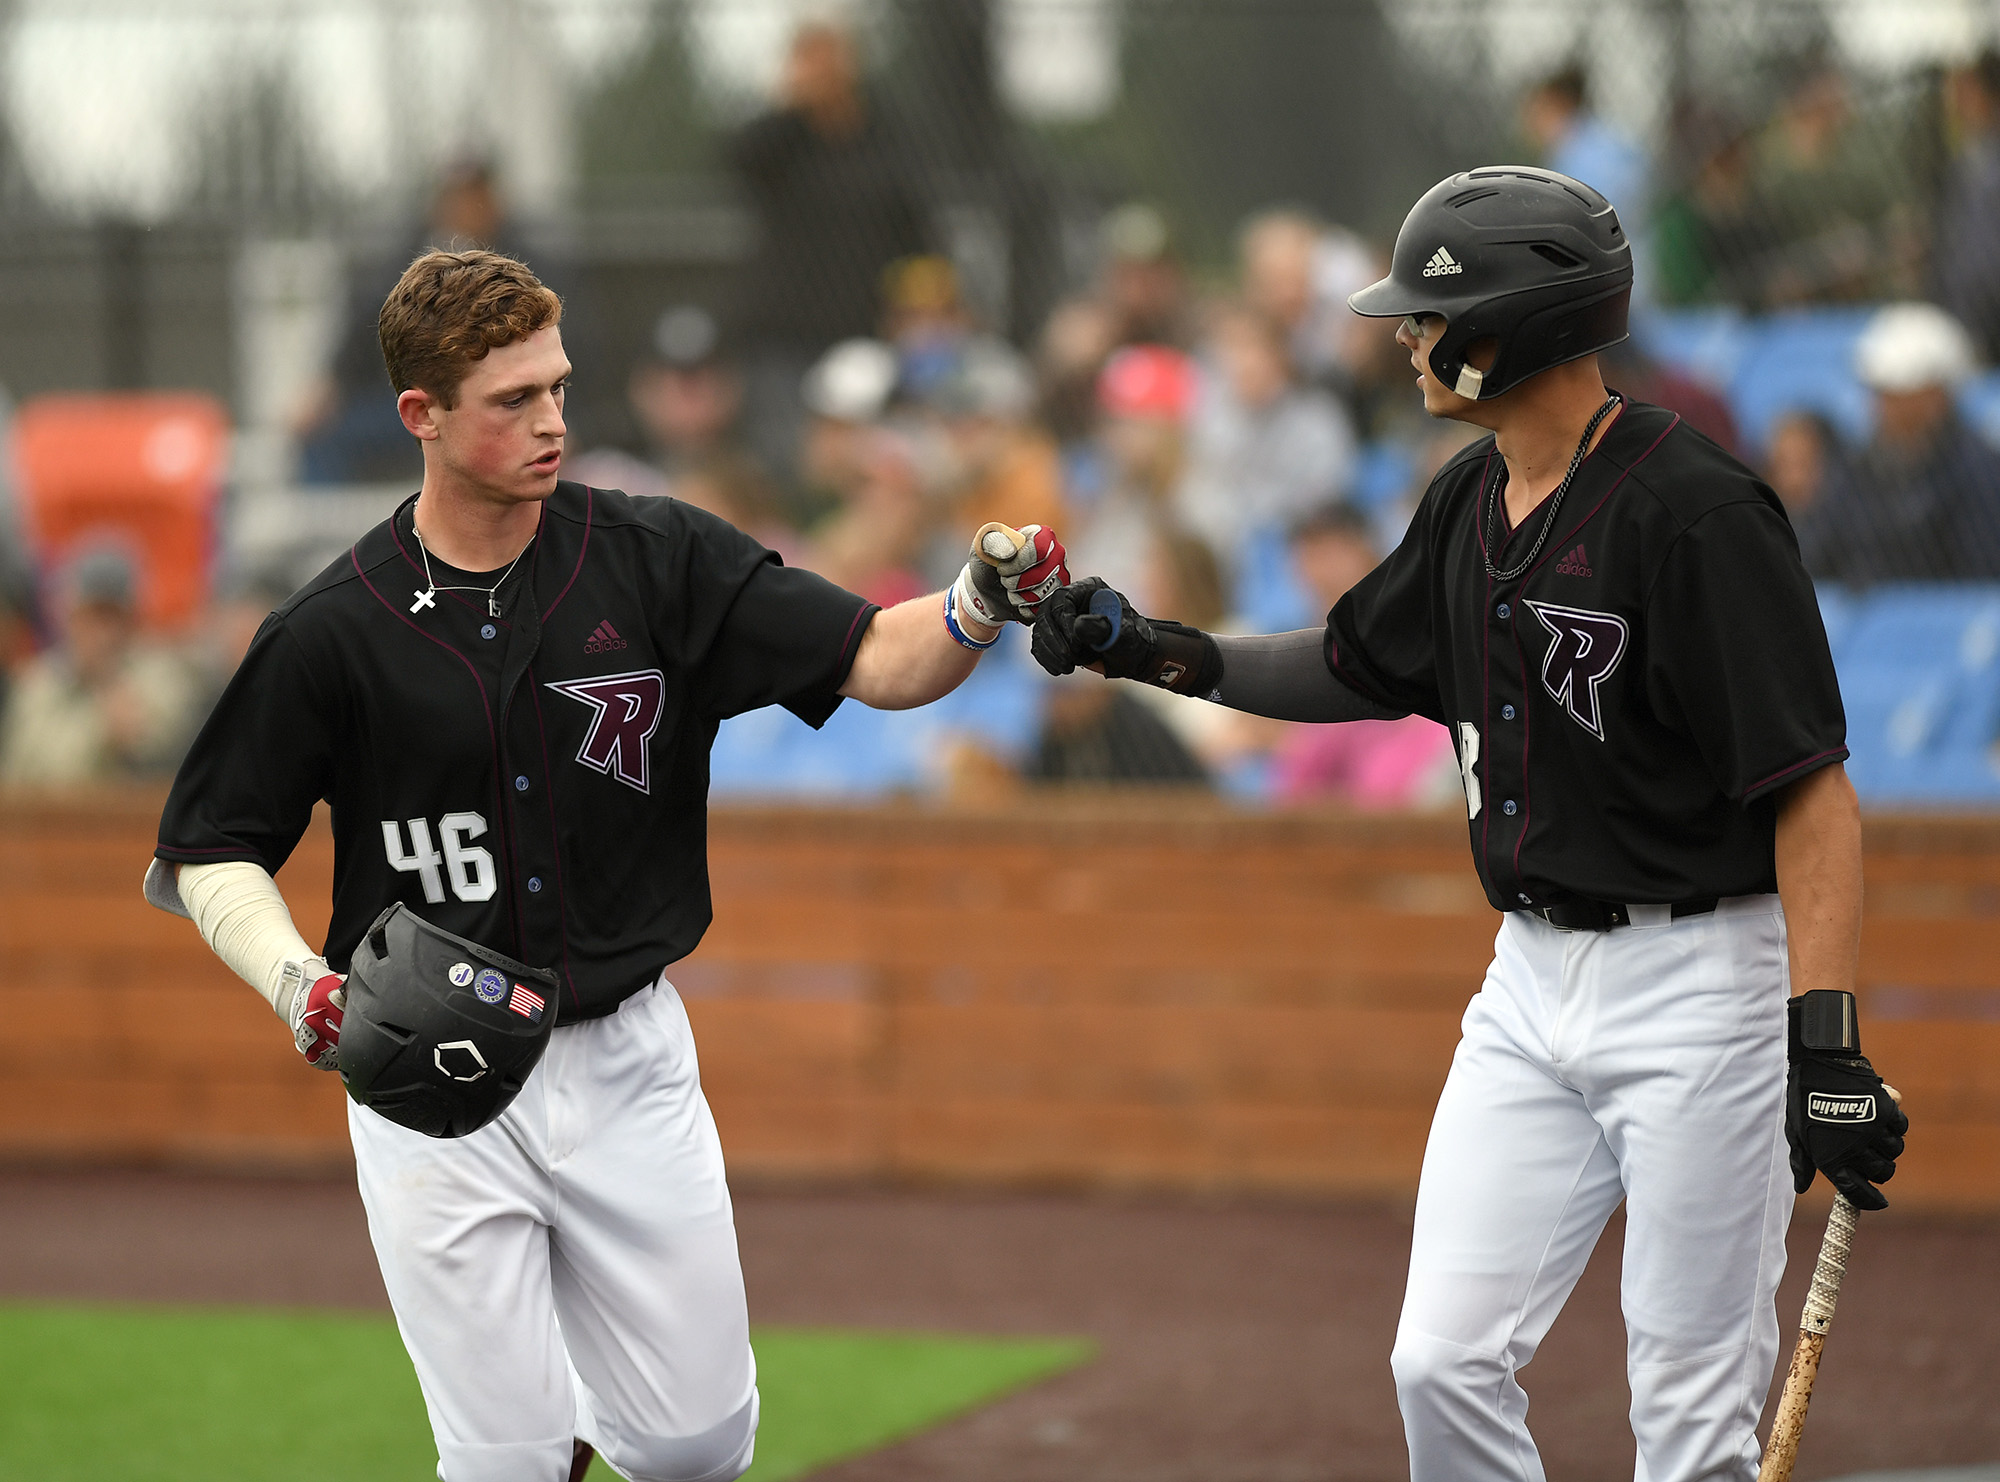 Raptors player Jackson Nicklaus, left, fist bumps teammate Nick Seamons after Nicklaus hit a home run Friday, June 16, 2023, during the Raptors’ game against Cowlitz at the Ridgefield Outdoor Recreation Complex.